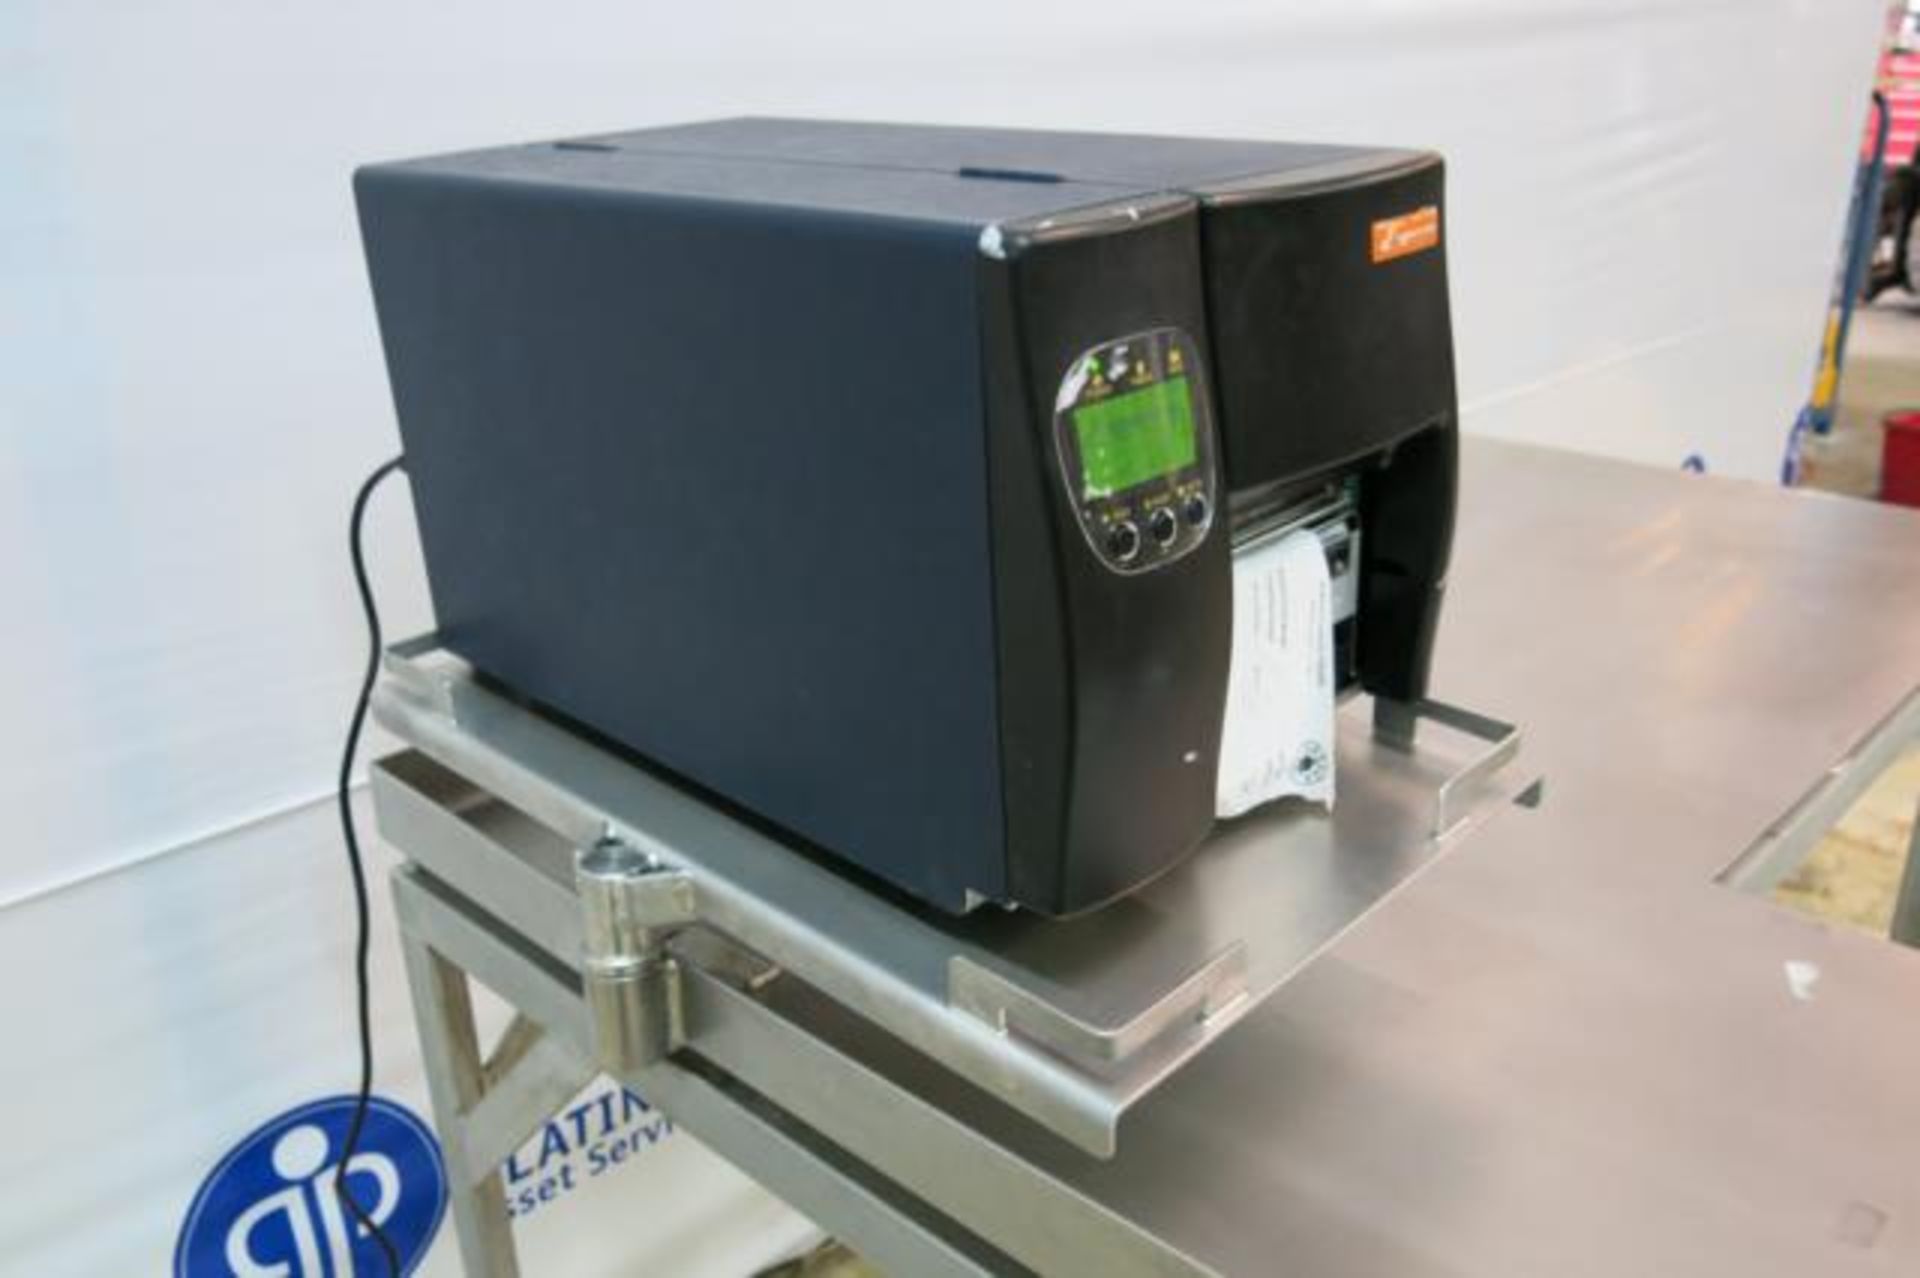 ESPERA, ESD 234, THERMAL TRANSFER PRINTER, S/N 263 01 01100 WITH STAINLESS STEEL TABLE - Image 4 of 7